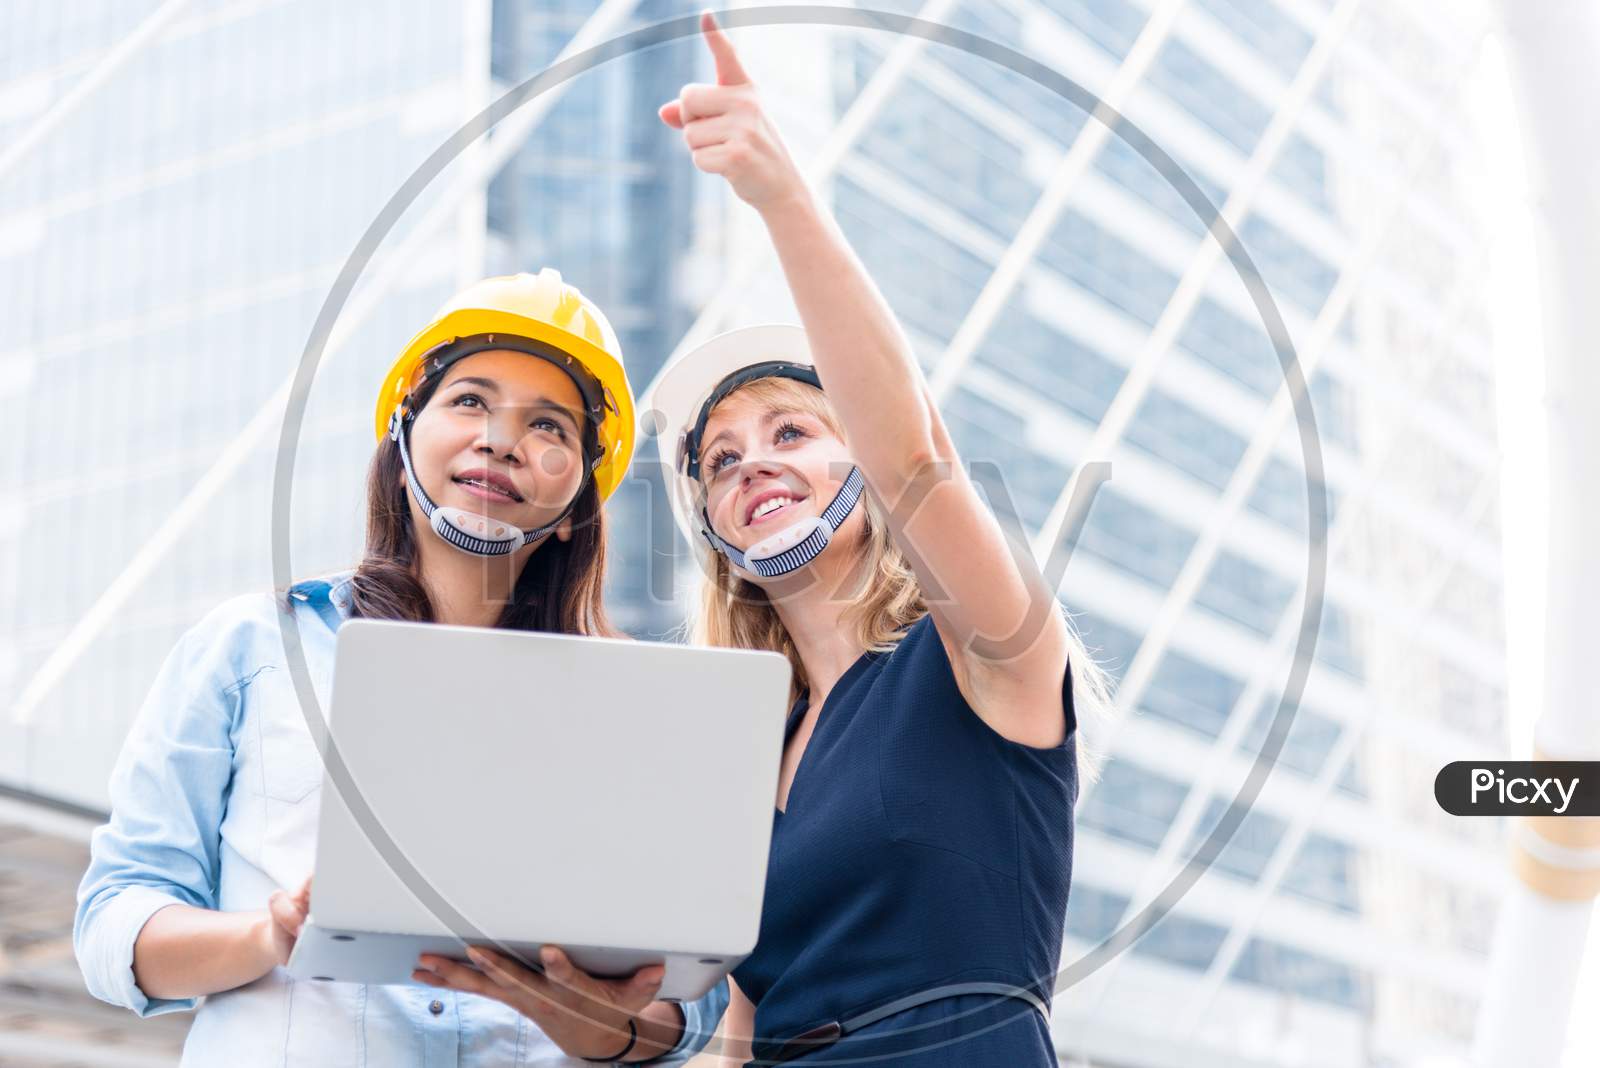 Two Women Engineering Surveying For Startup And Launching New Project. Building And Construction Concept. Business And Happiness Of Cooperation Concept. Civil Engineer Theme. City And Urban Theme